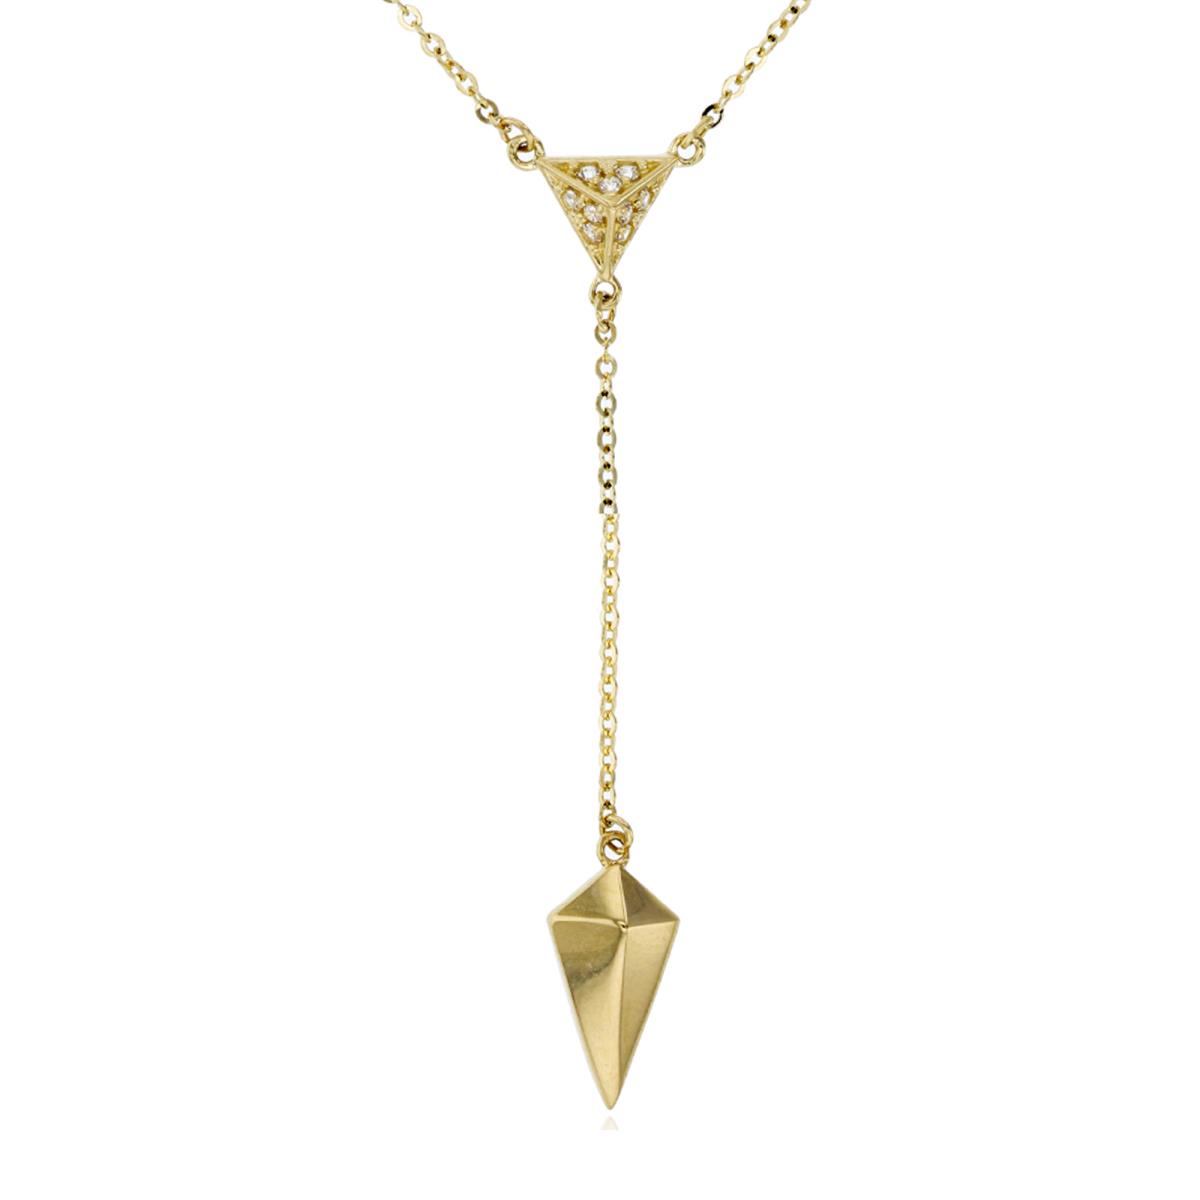 10K Yellow Gold Micropave Domed Triangle & Dangling Polished Rhombus 16"+2" Necklace